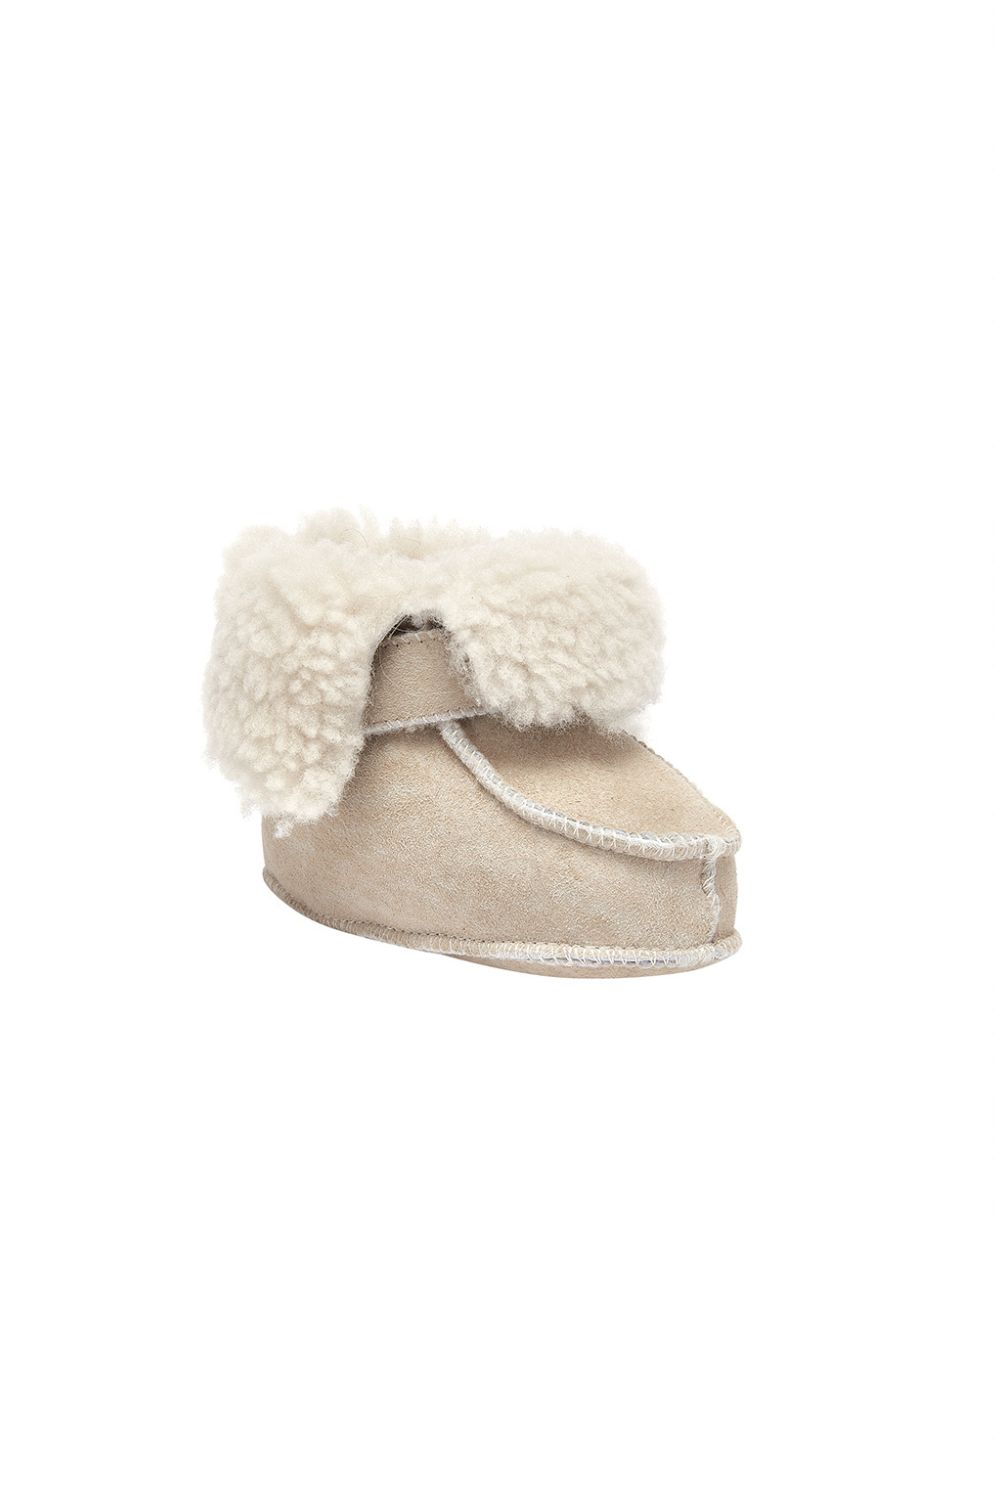 beige sheepskin baby boots gushlow and cole cut out side angle